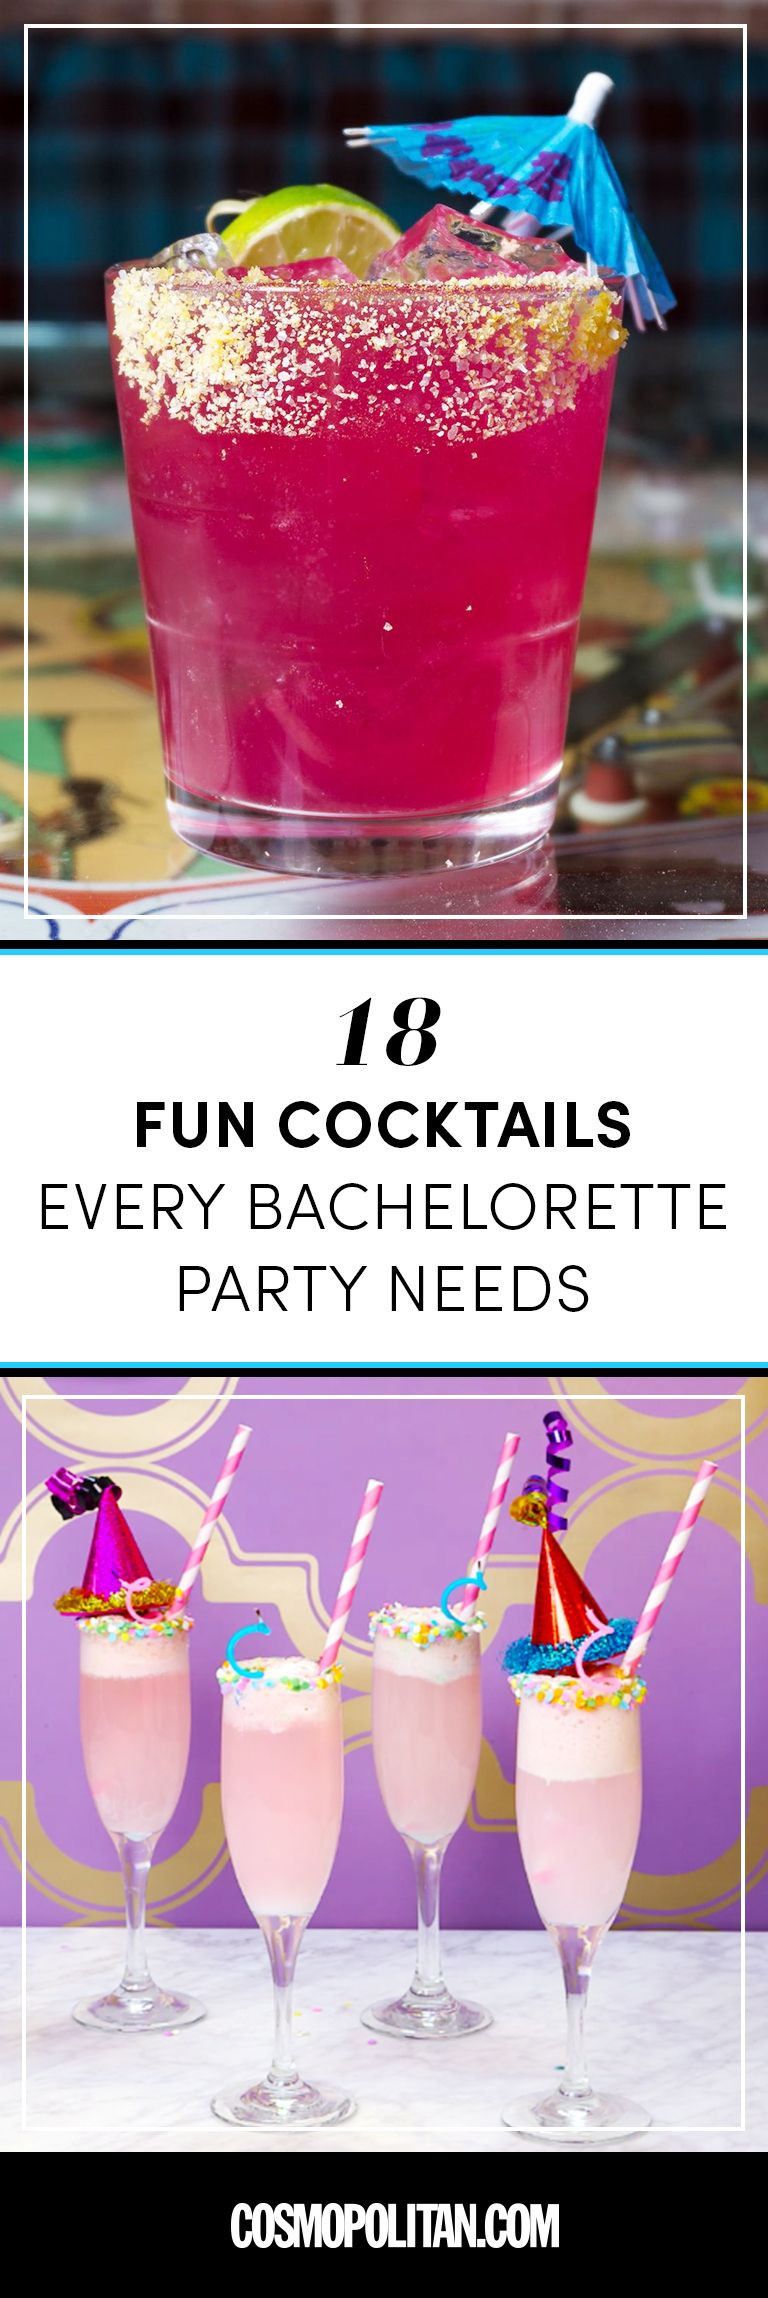 Bachelorette Party Drinks Ideas
 Bachelorette Party Drinks Cocktail Recipes for